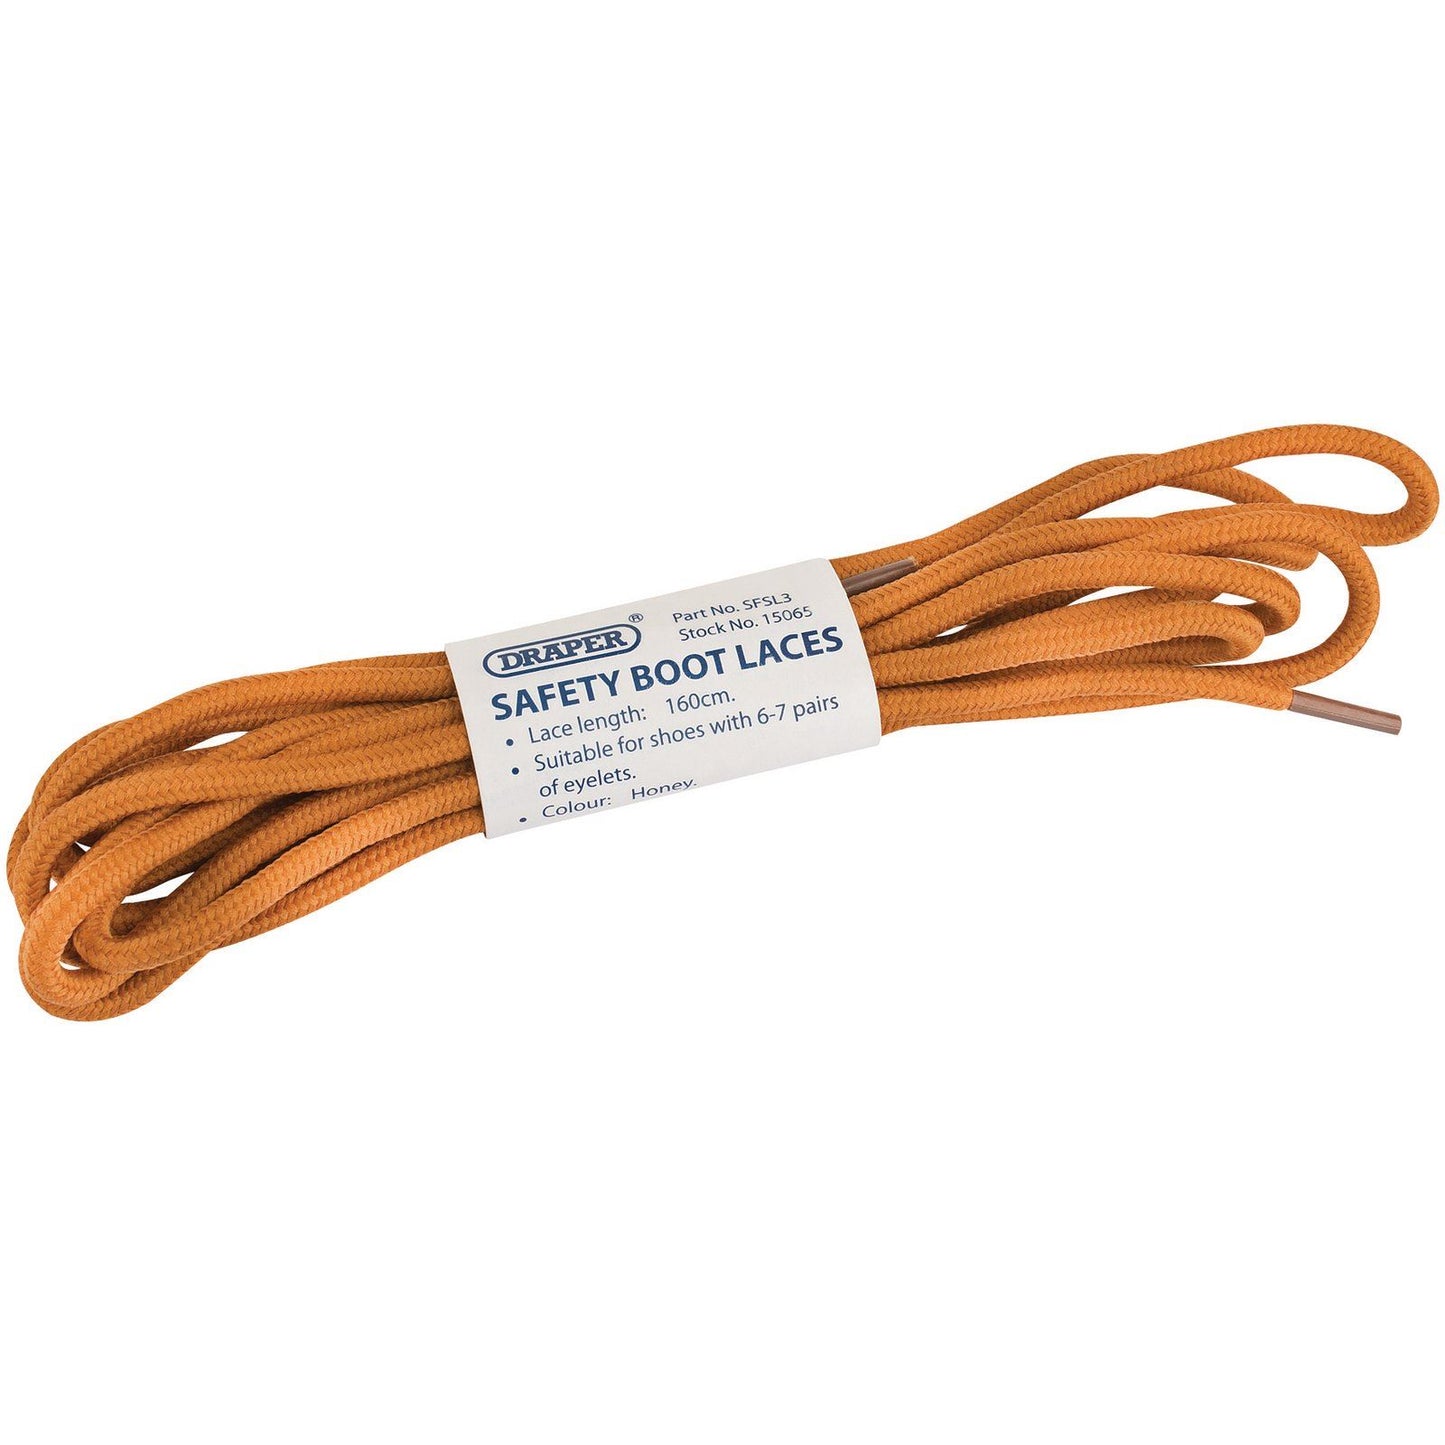 Draper Spare Laces for NUBSB Safety Boots. SFSL3 - 15065